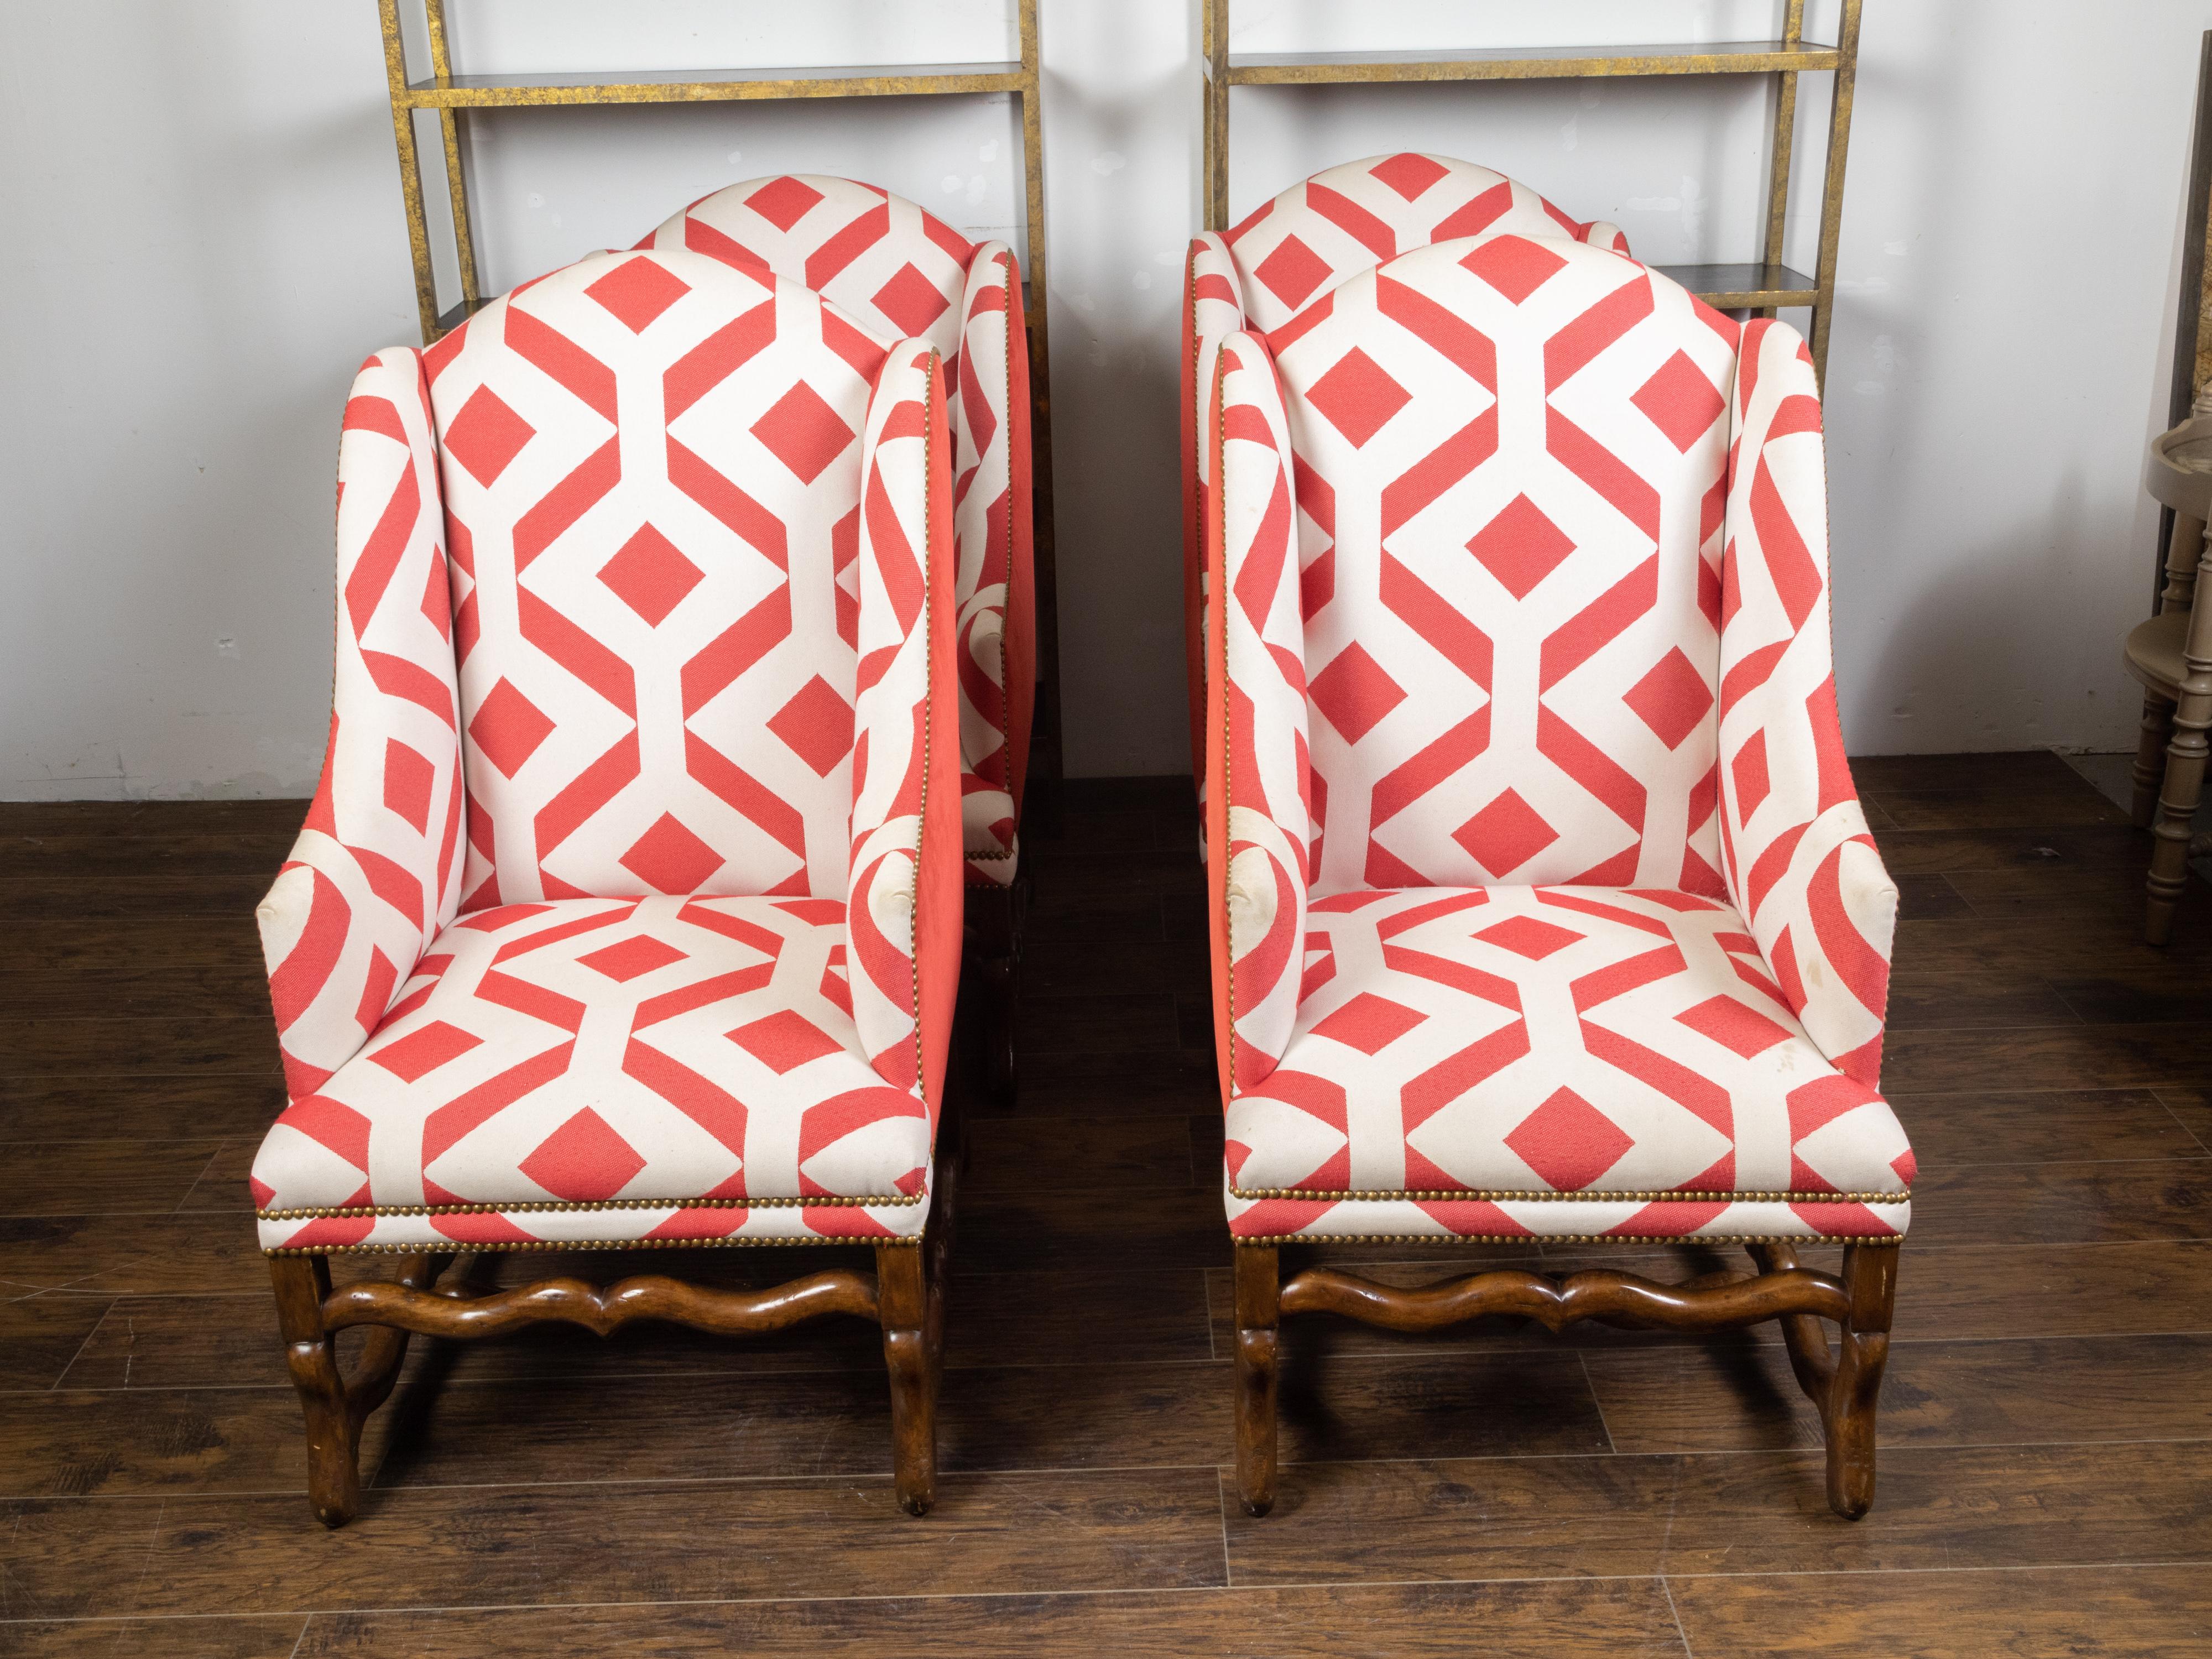 Four French wingback chairs from the early 20th century, with os de mouton bases and red and white geometric upholstery. Created in France during the first quarter of the 20th century, each of this set of four armchairs features a wingback offering